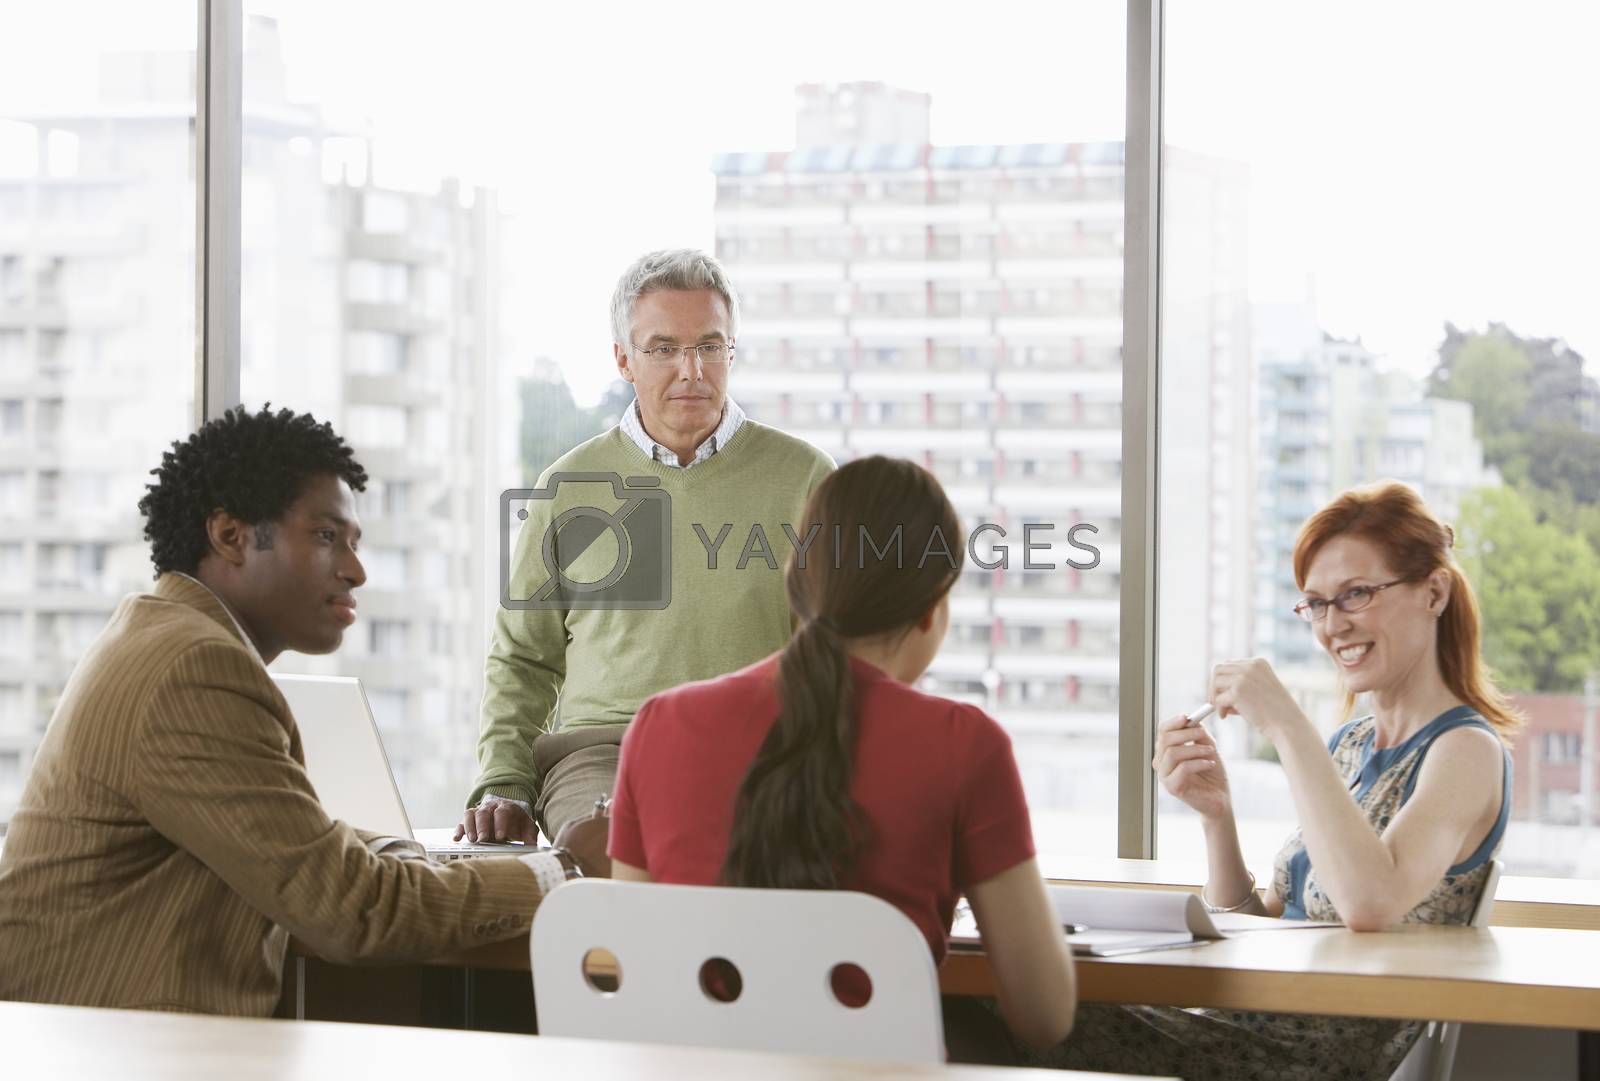 Royalty free image of Group of business colleagues at office meeting by moodboard